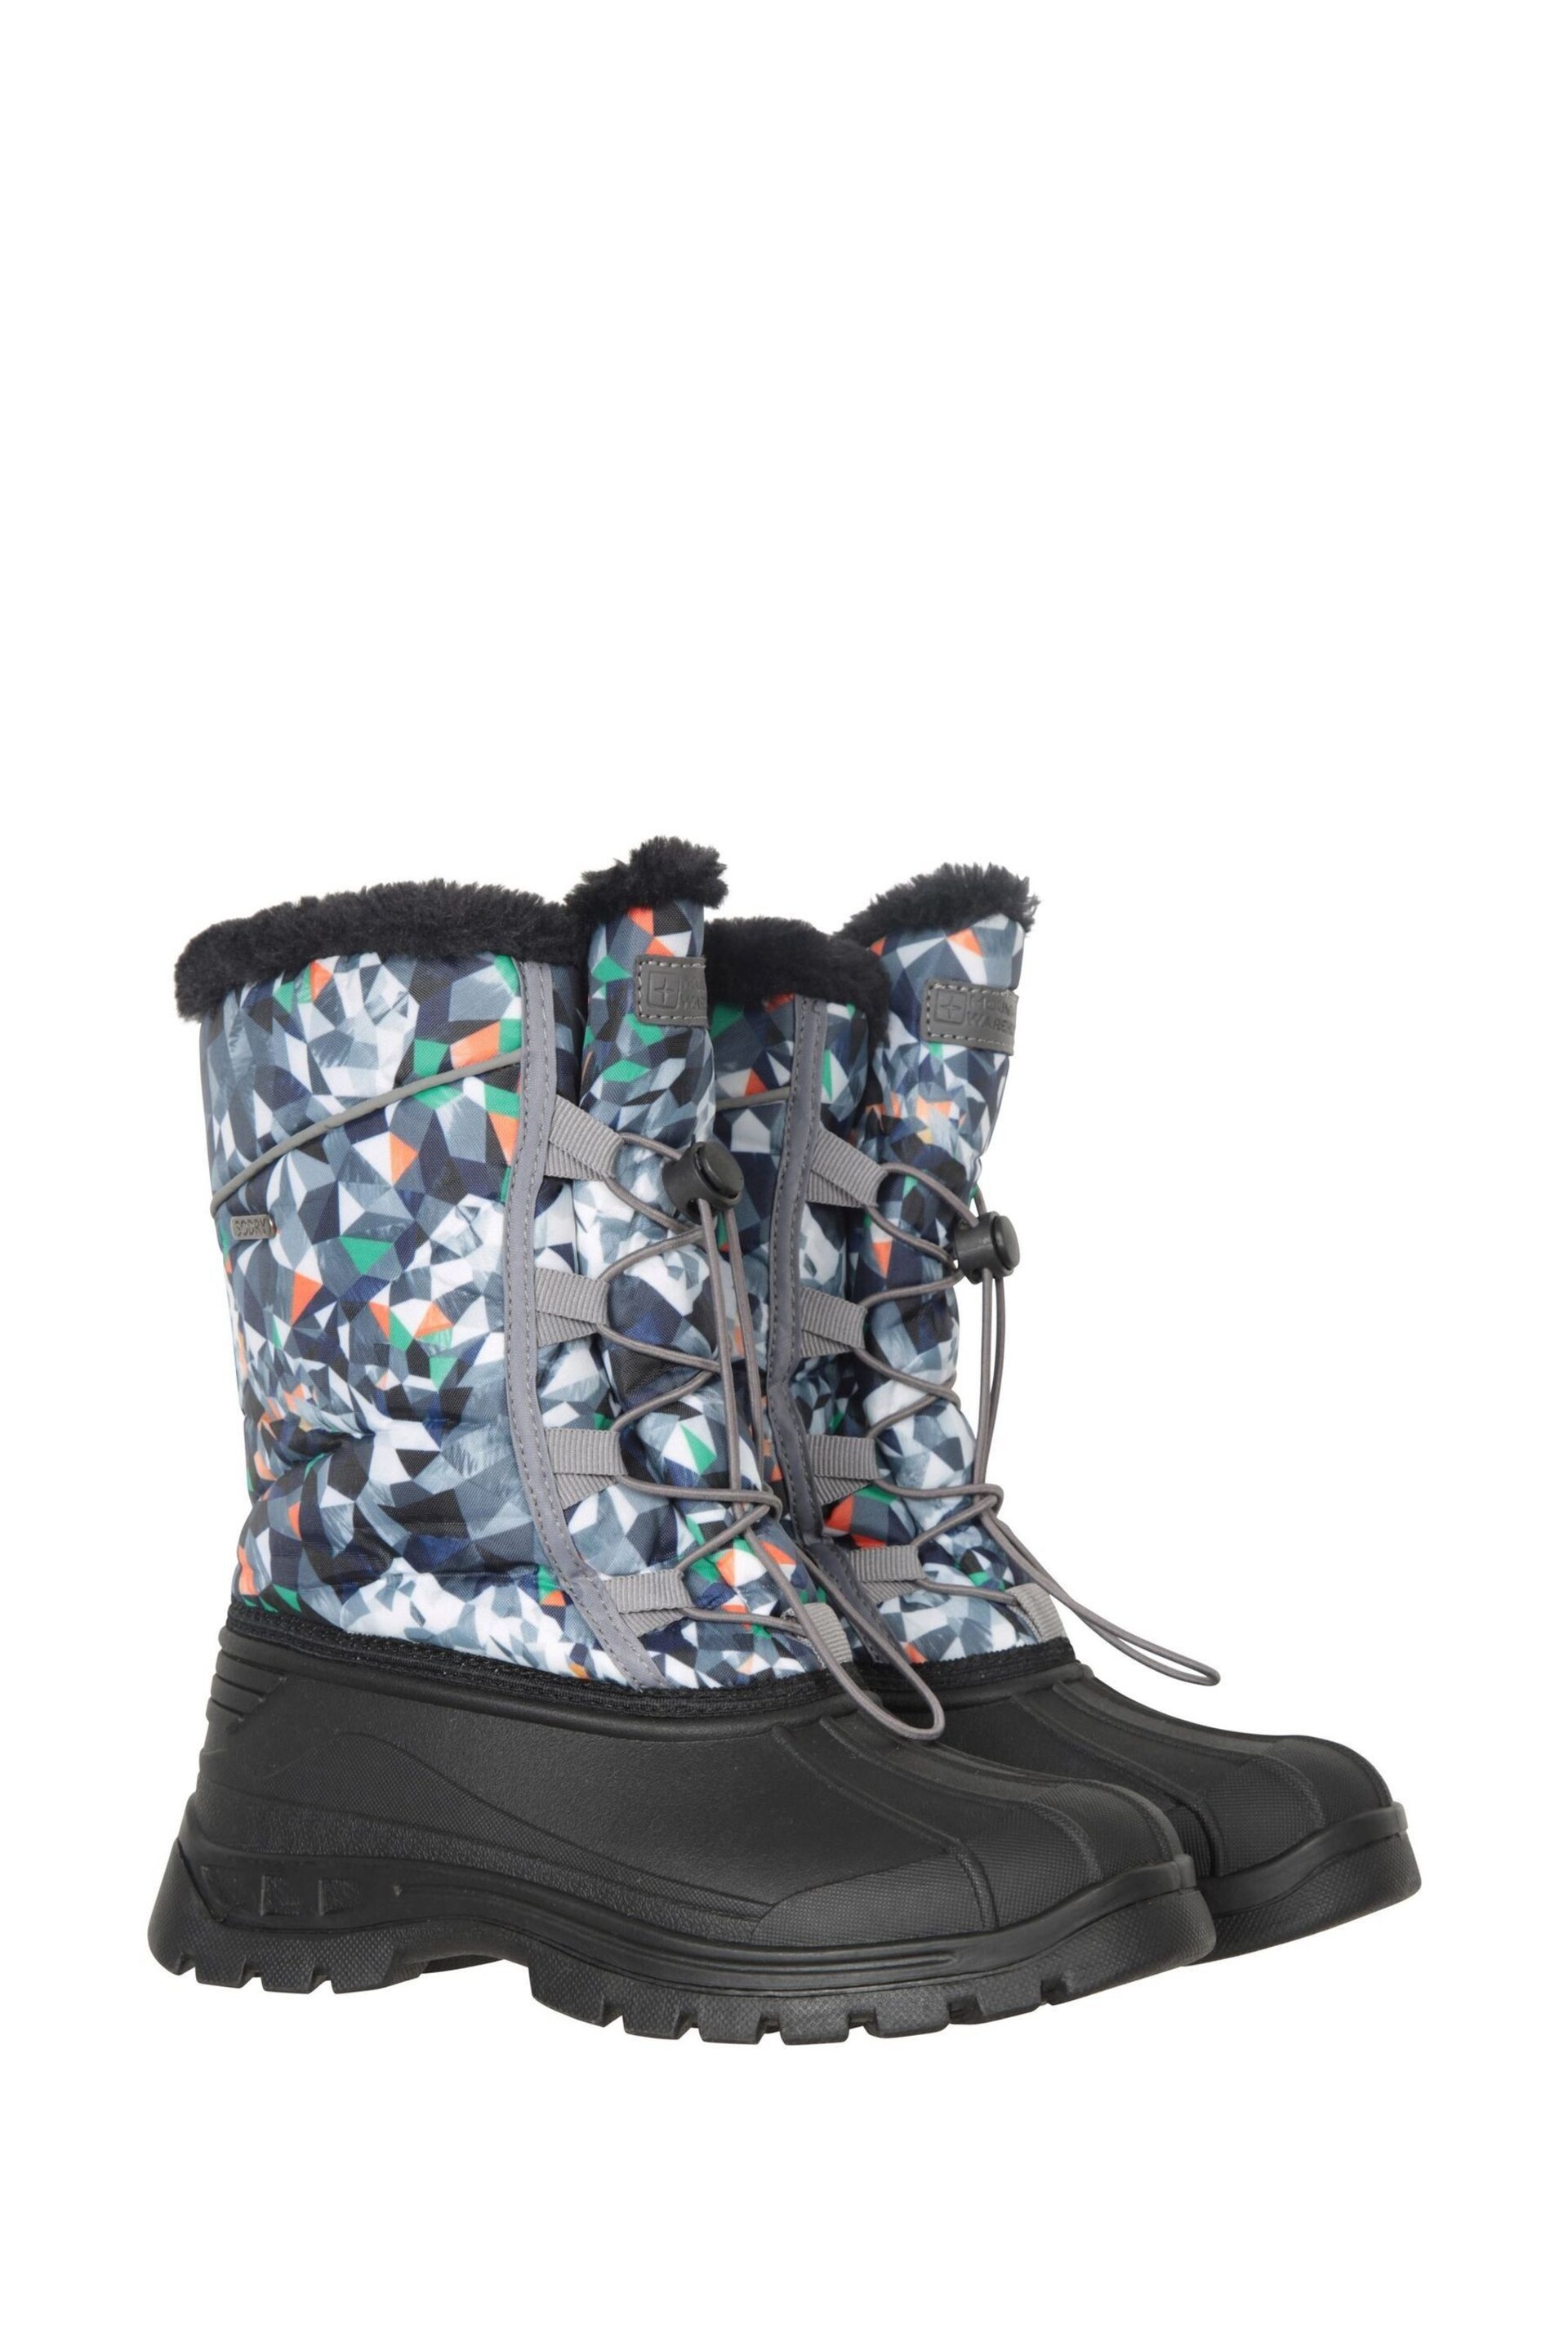 Mountain Warehouse Multi Kids Whistler Sherpa Lined Snow Boots - Image 1 of 6